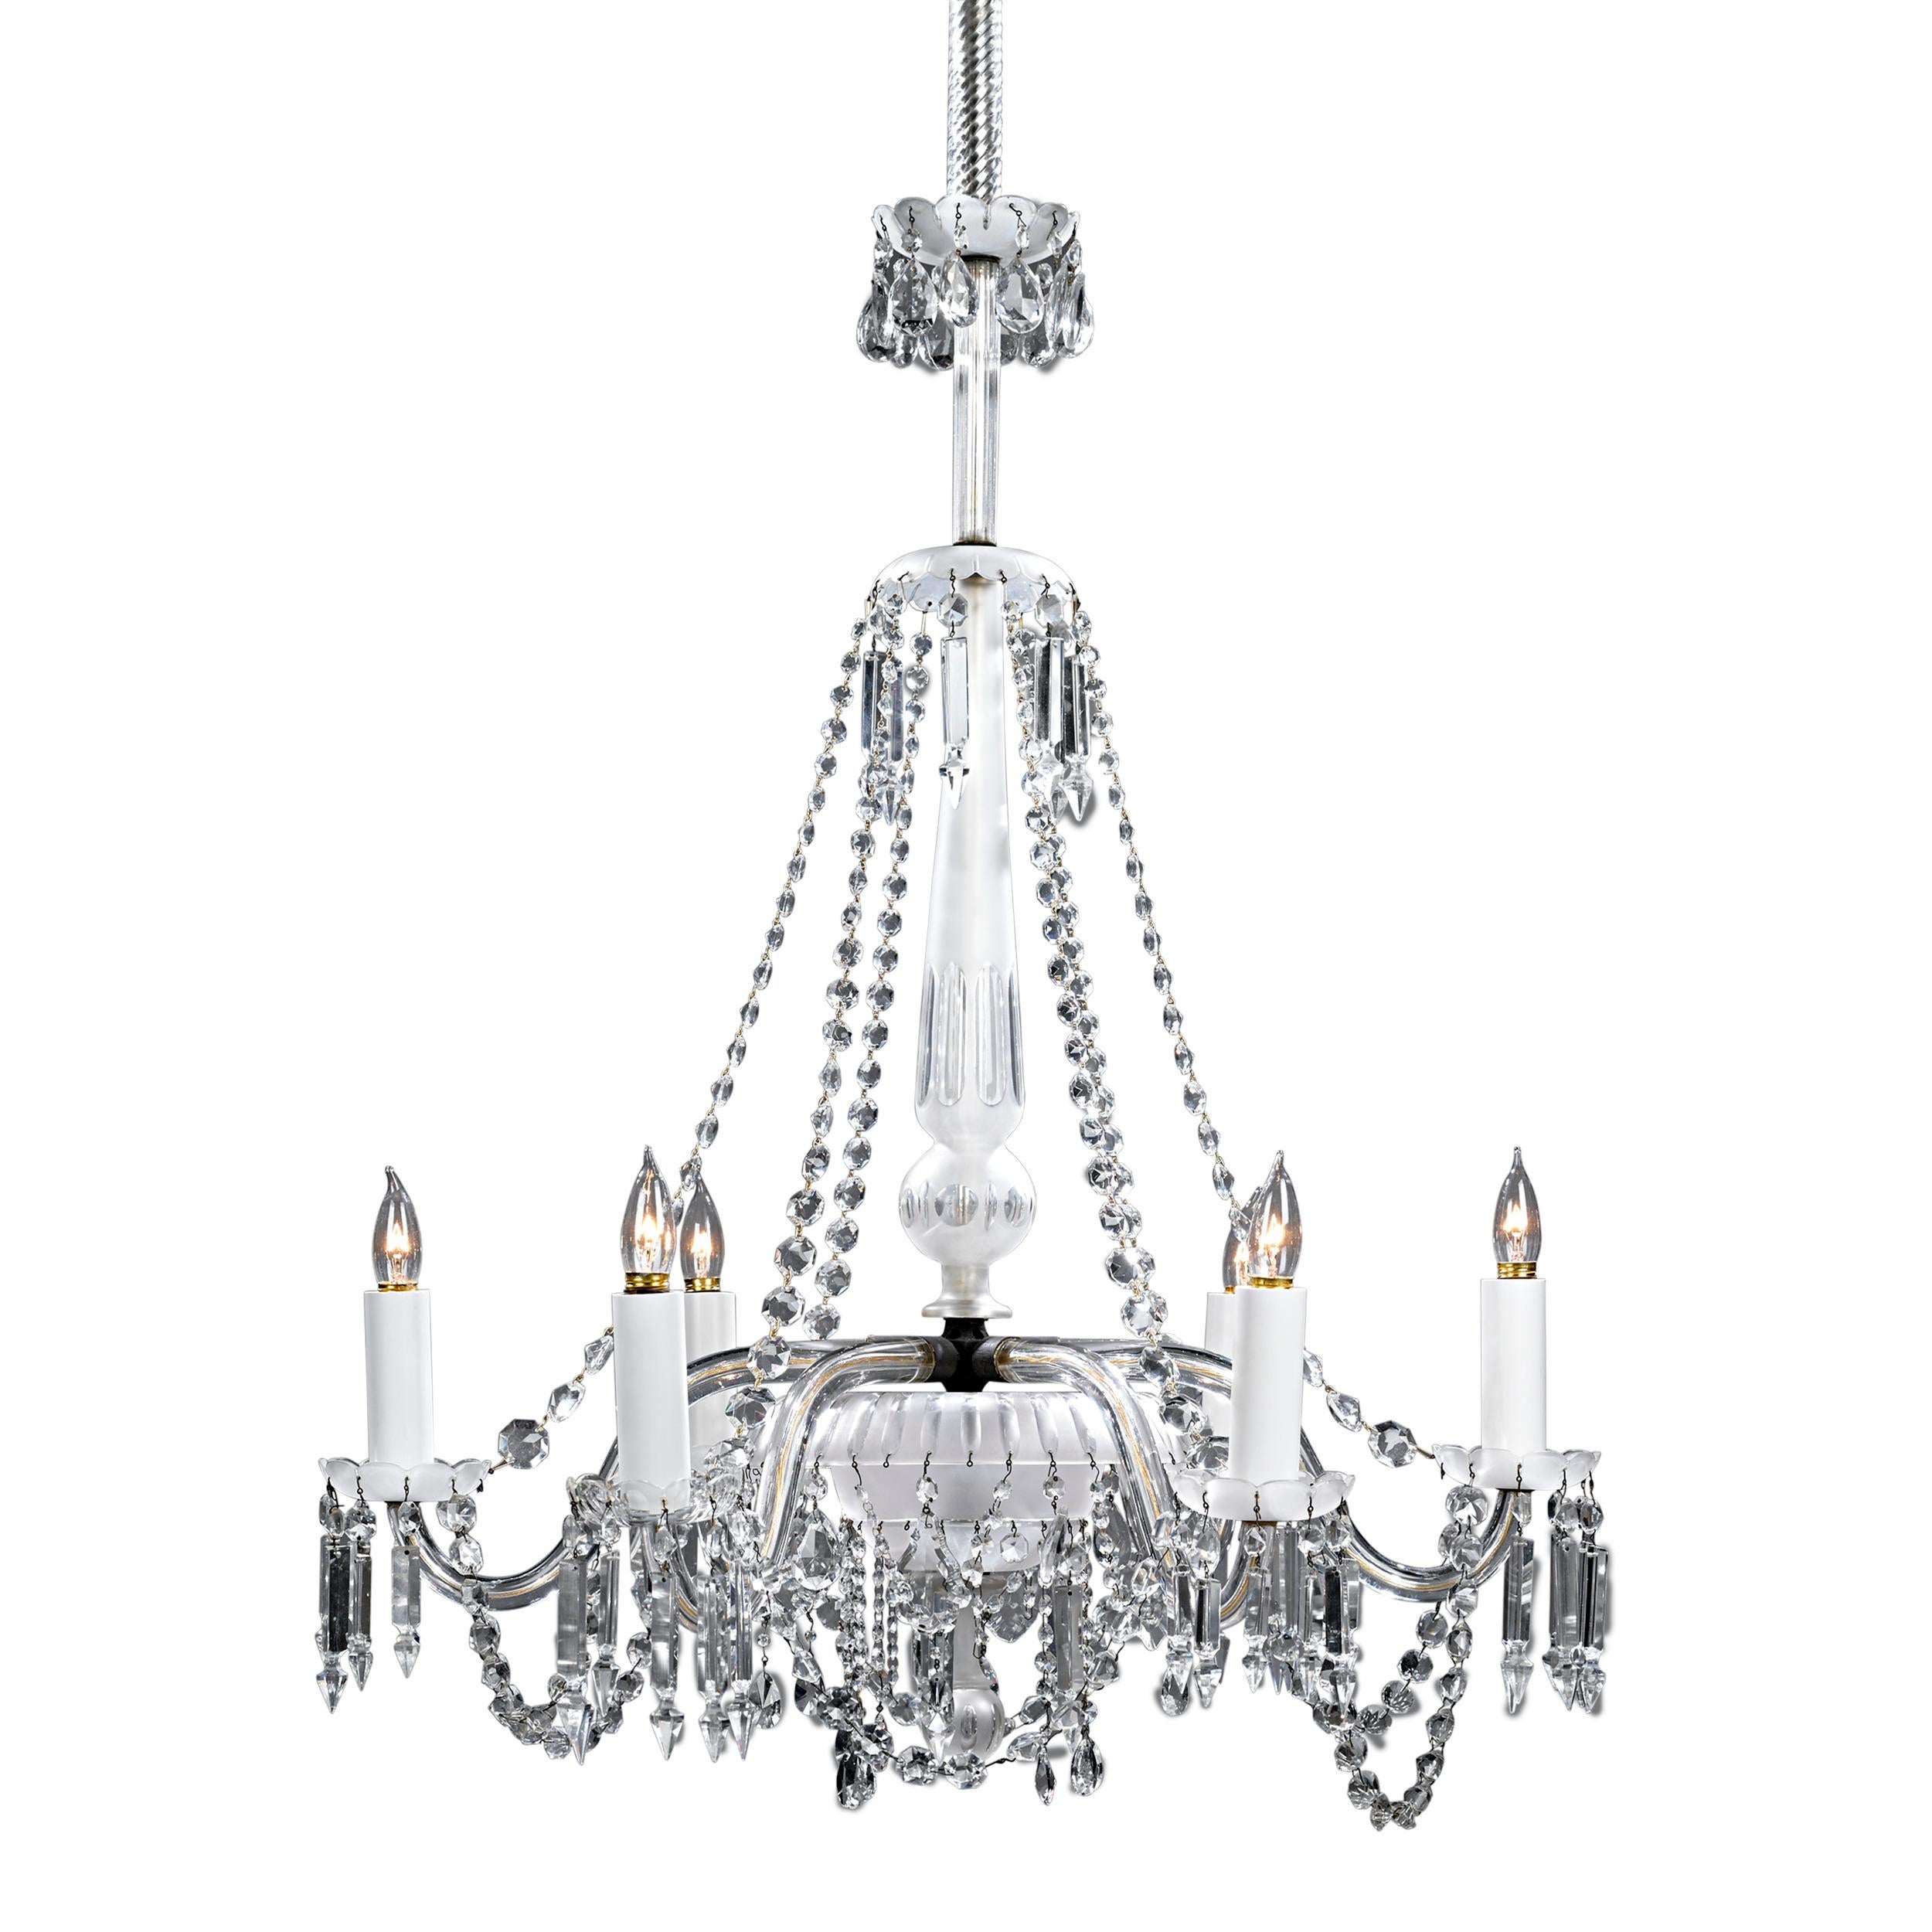 Hand-cut crystal bells, bead swags and prisms adorn this remarkable English crystal chandelier. The six-light chandelier is of exceptional quality, and its crystal adornments beautifully cast the light from its electric 